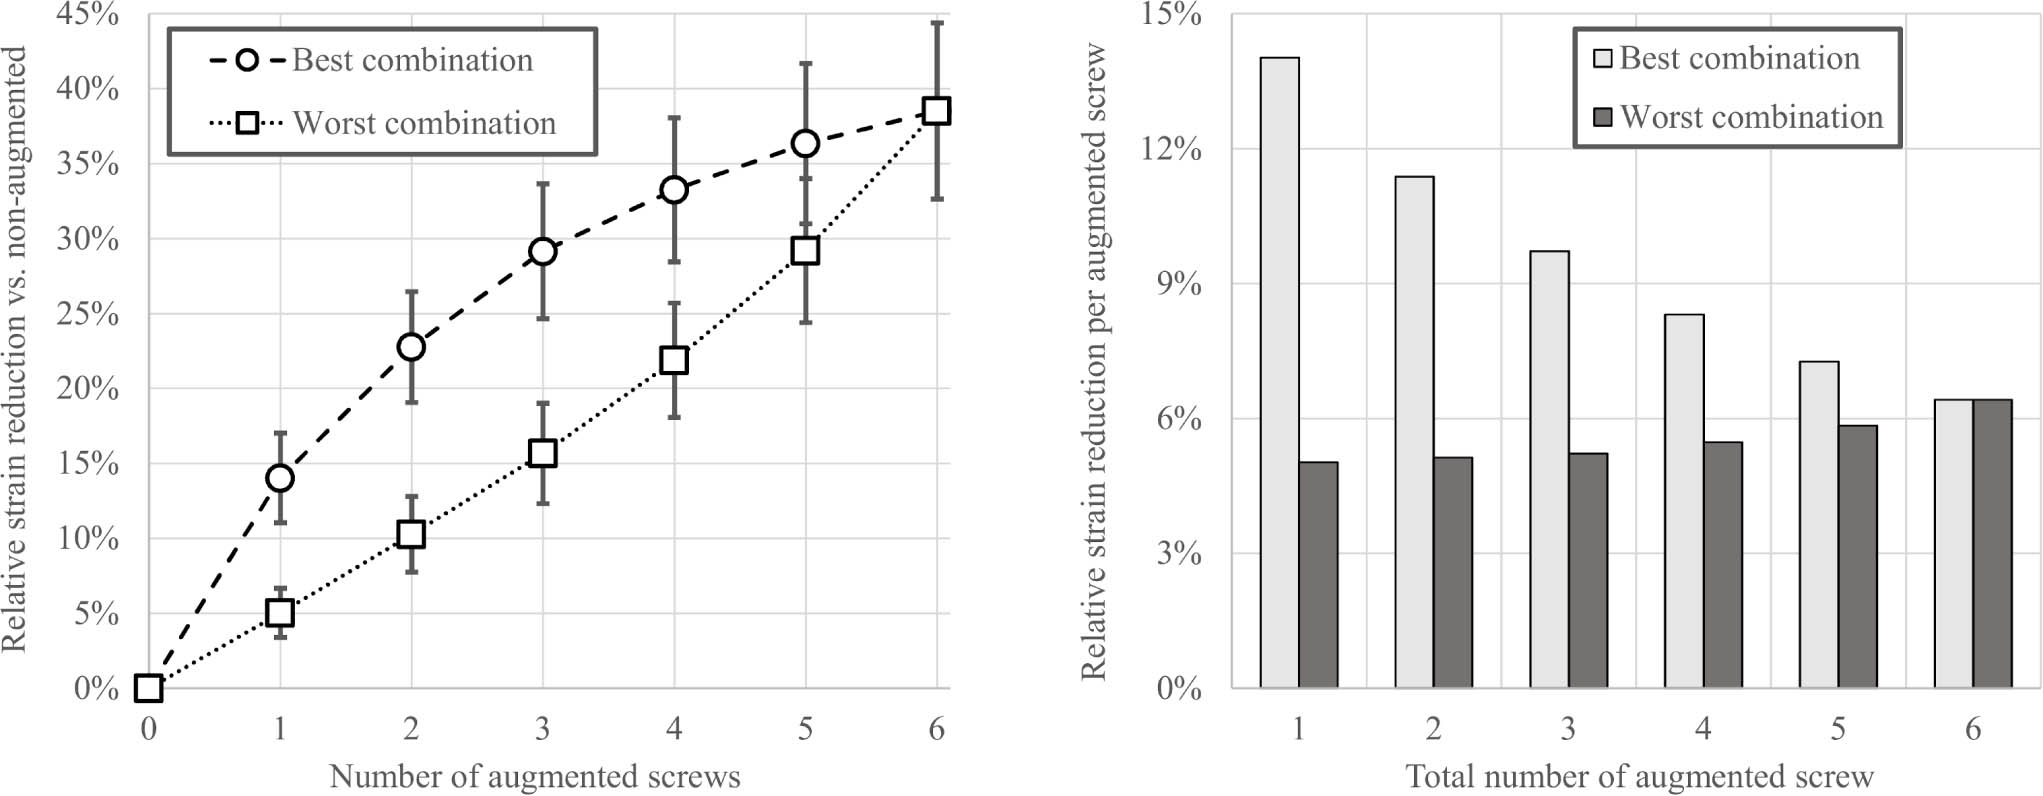 Fig. 2 
          Left: Mean and SD of the reduction in peri-screw strains in the 24 subjects for different augmentation combinations normalized to the non-augmented state, showing significant differences (p < 0.001, Wilcoxon signed-rank test) between the best and worst options for one to five augmented screws. Right: Mean reduction in peri-screw strains normalized to the total number of augmented screws for the best and worst combinations.
        